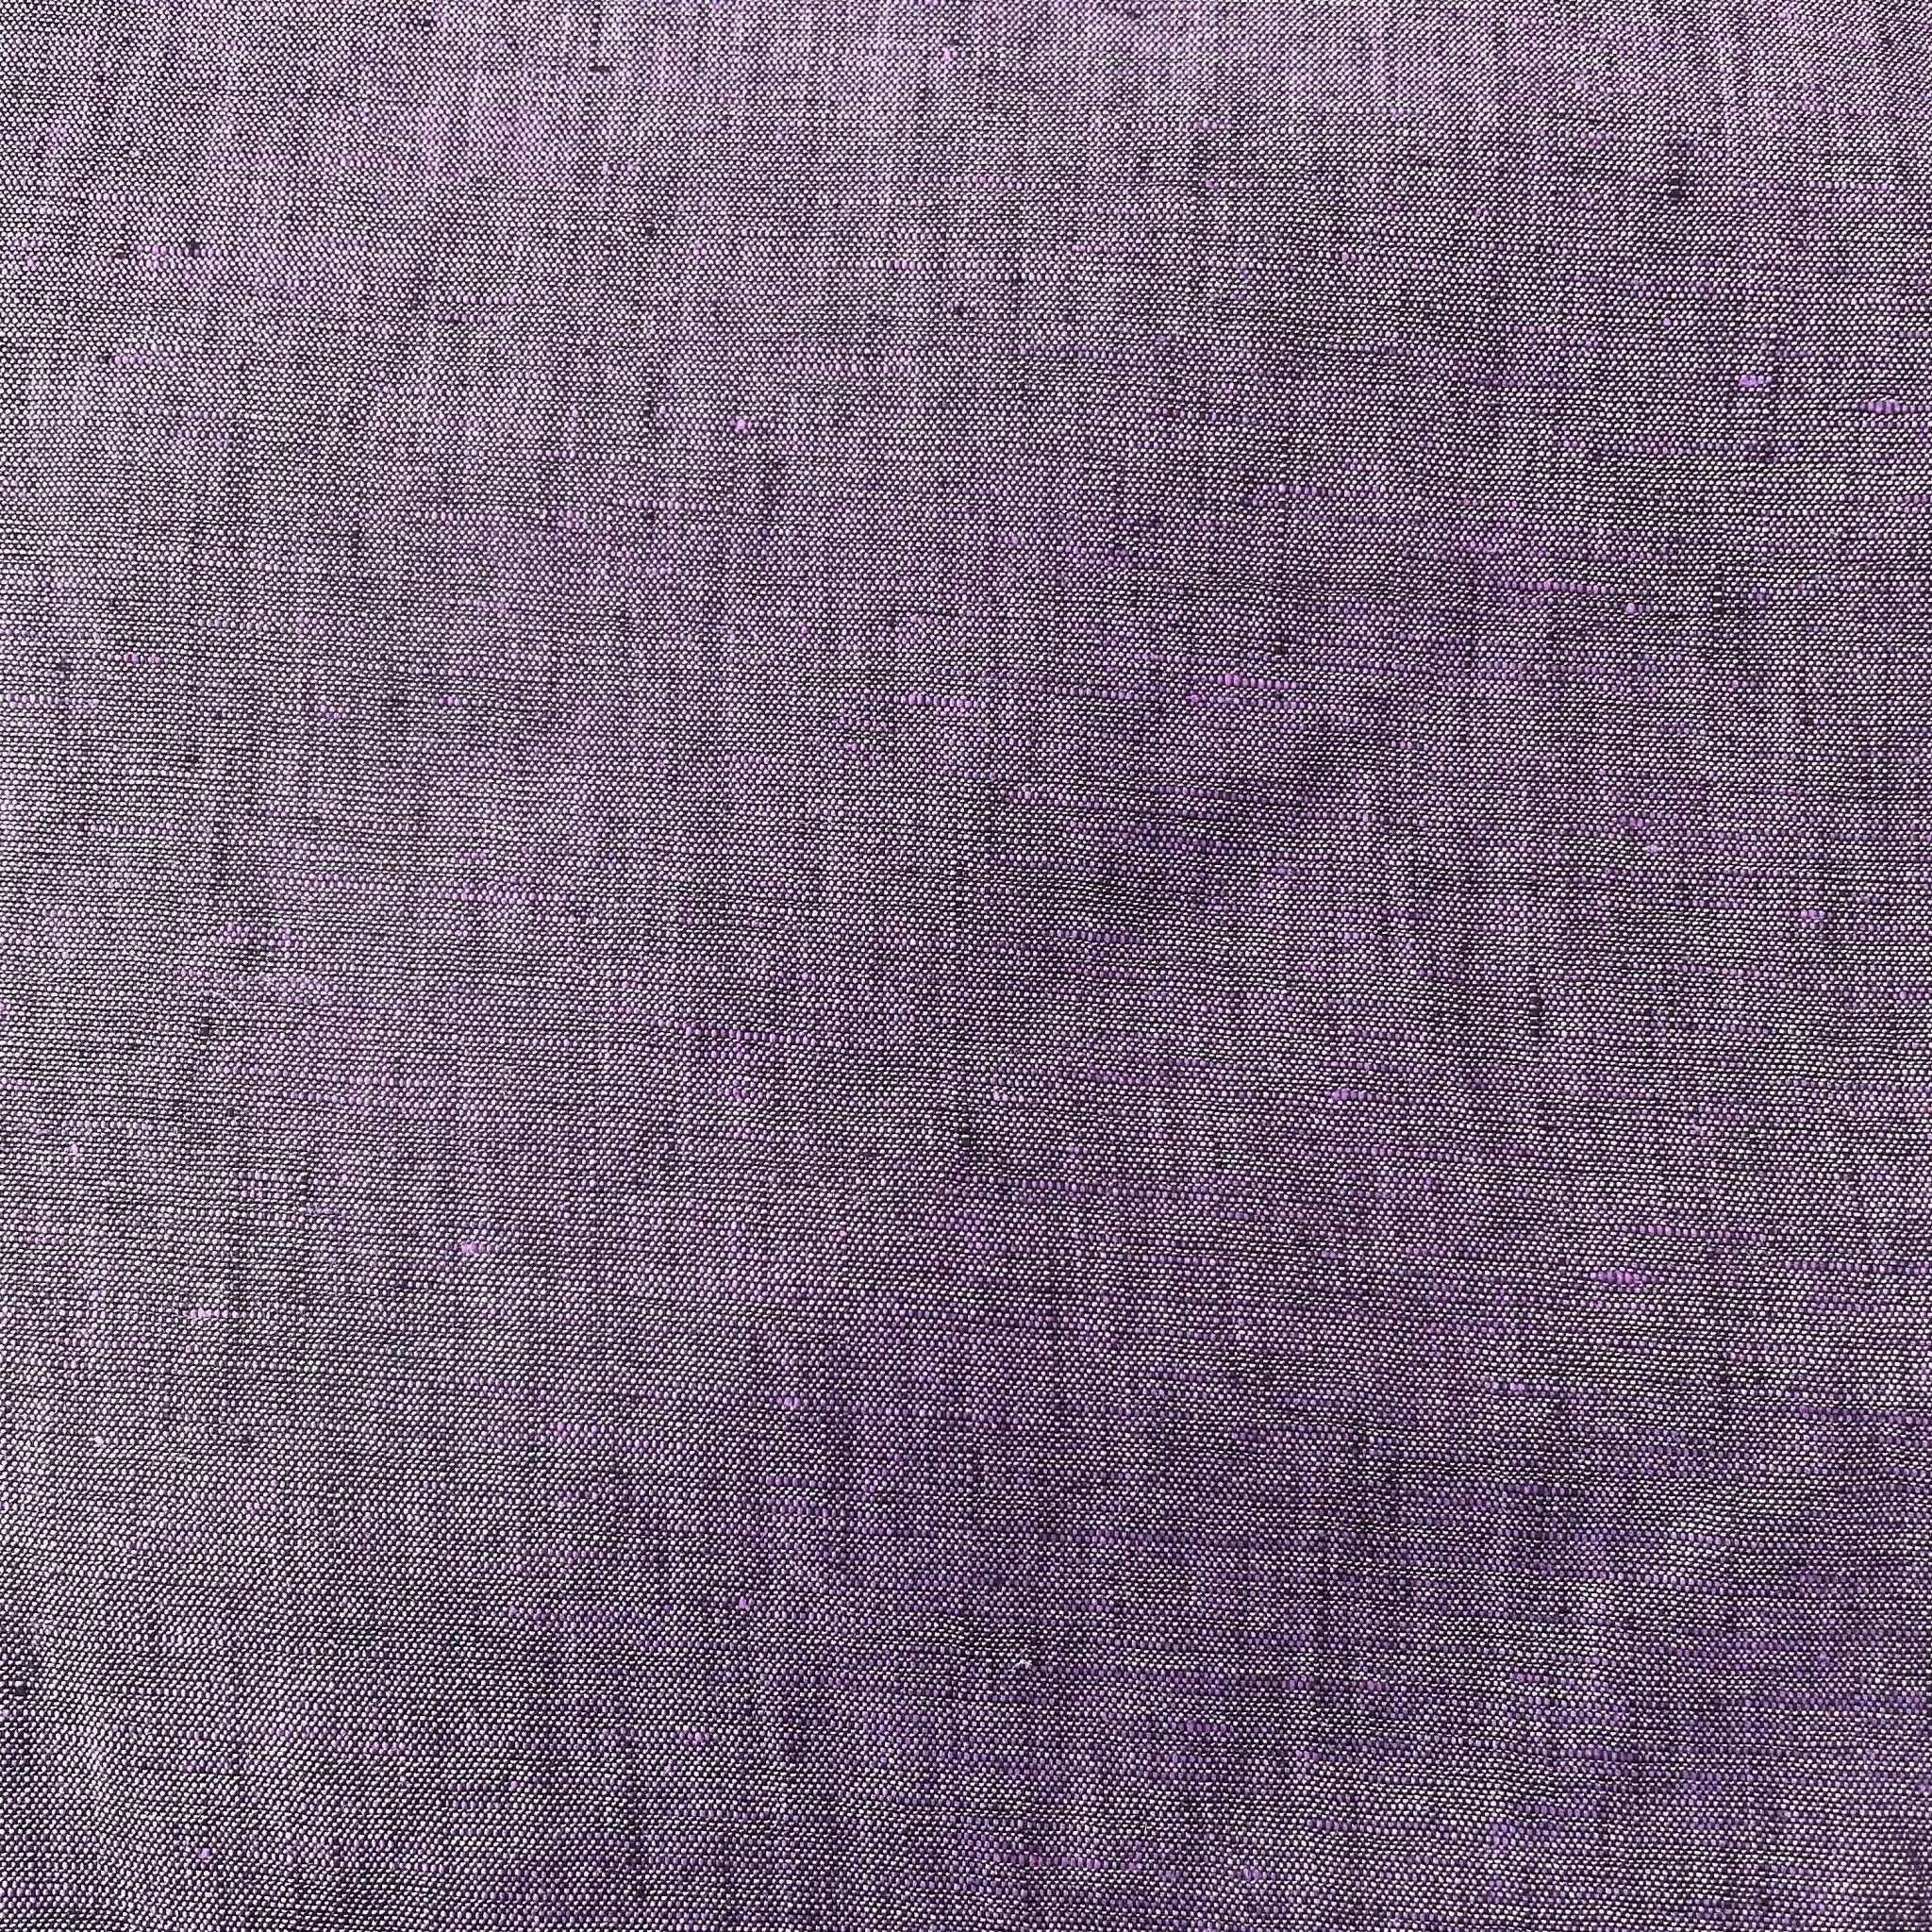 Linen Fabric Light Weight Soft Touch 21S 7042 6292 5968 7127 - The Linen Lab - Violet